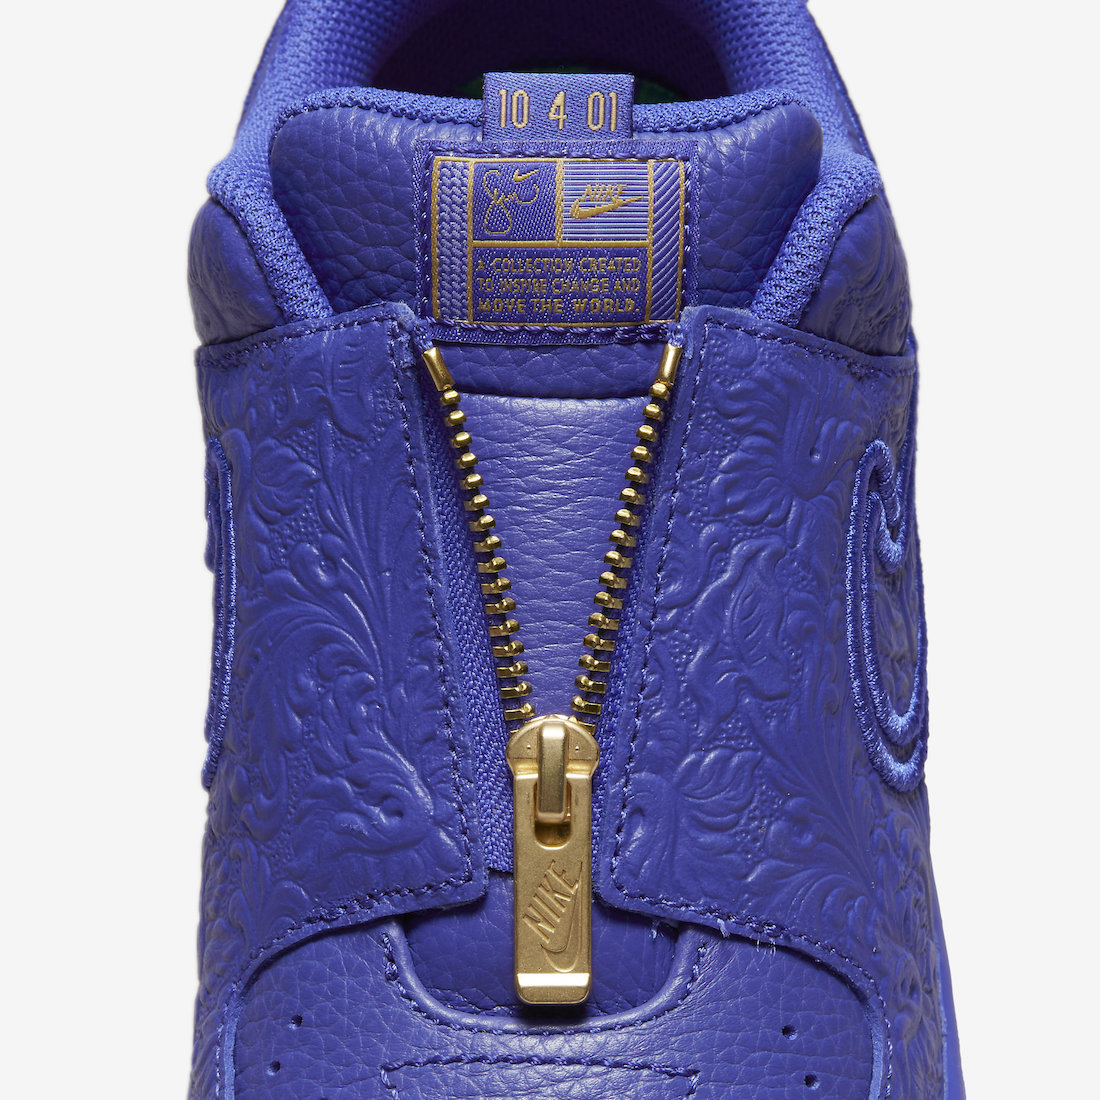 Serena Williams Nike Air Force 1 Lapis DR9842-400 Release Date Price